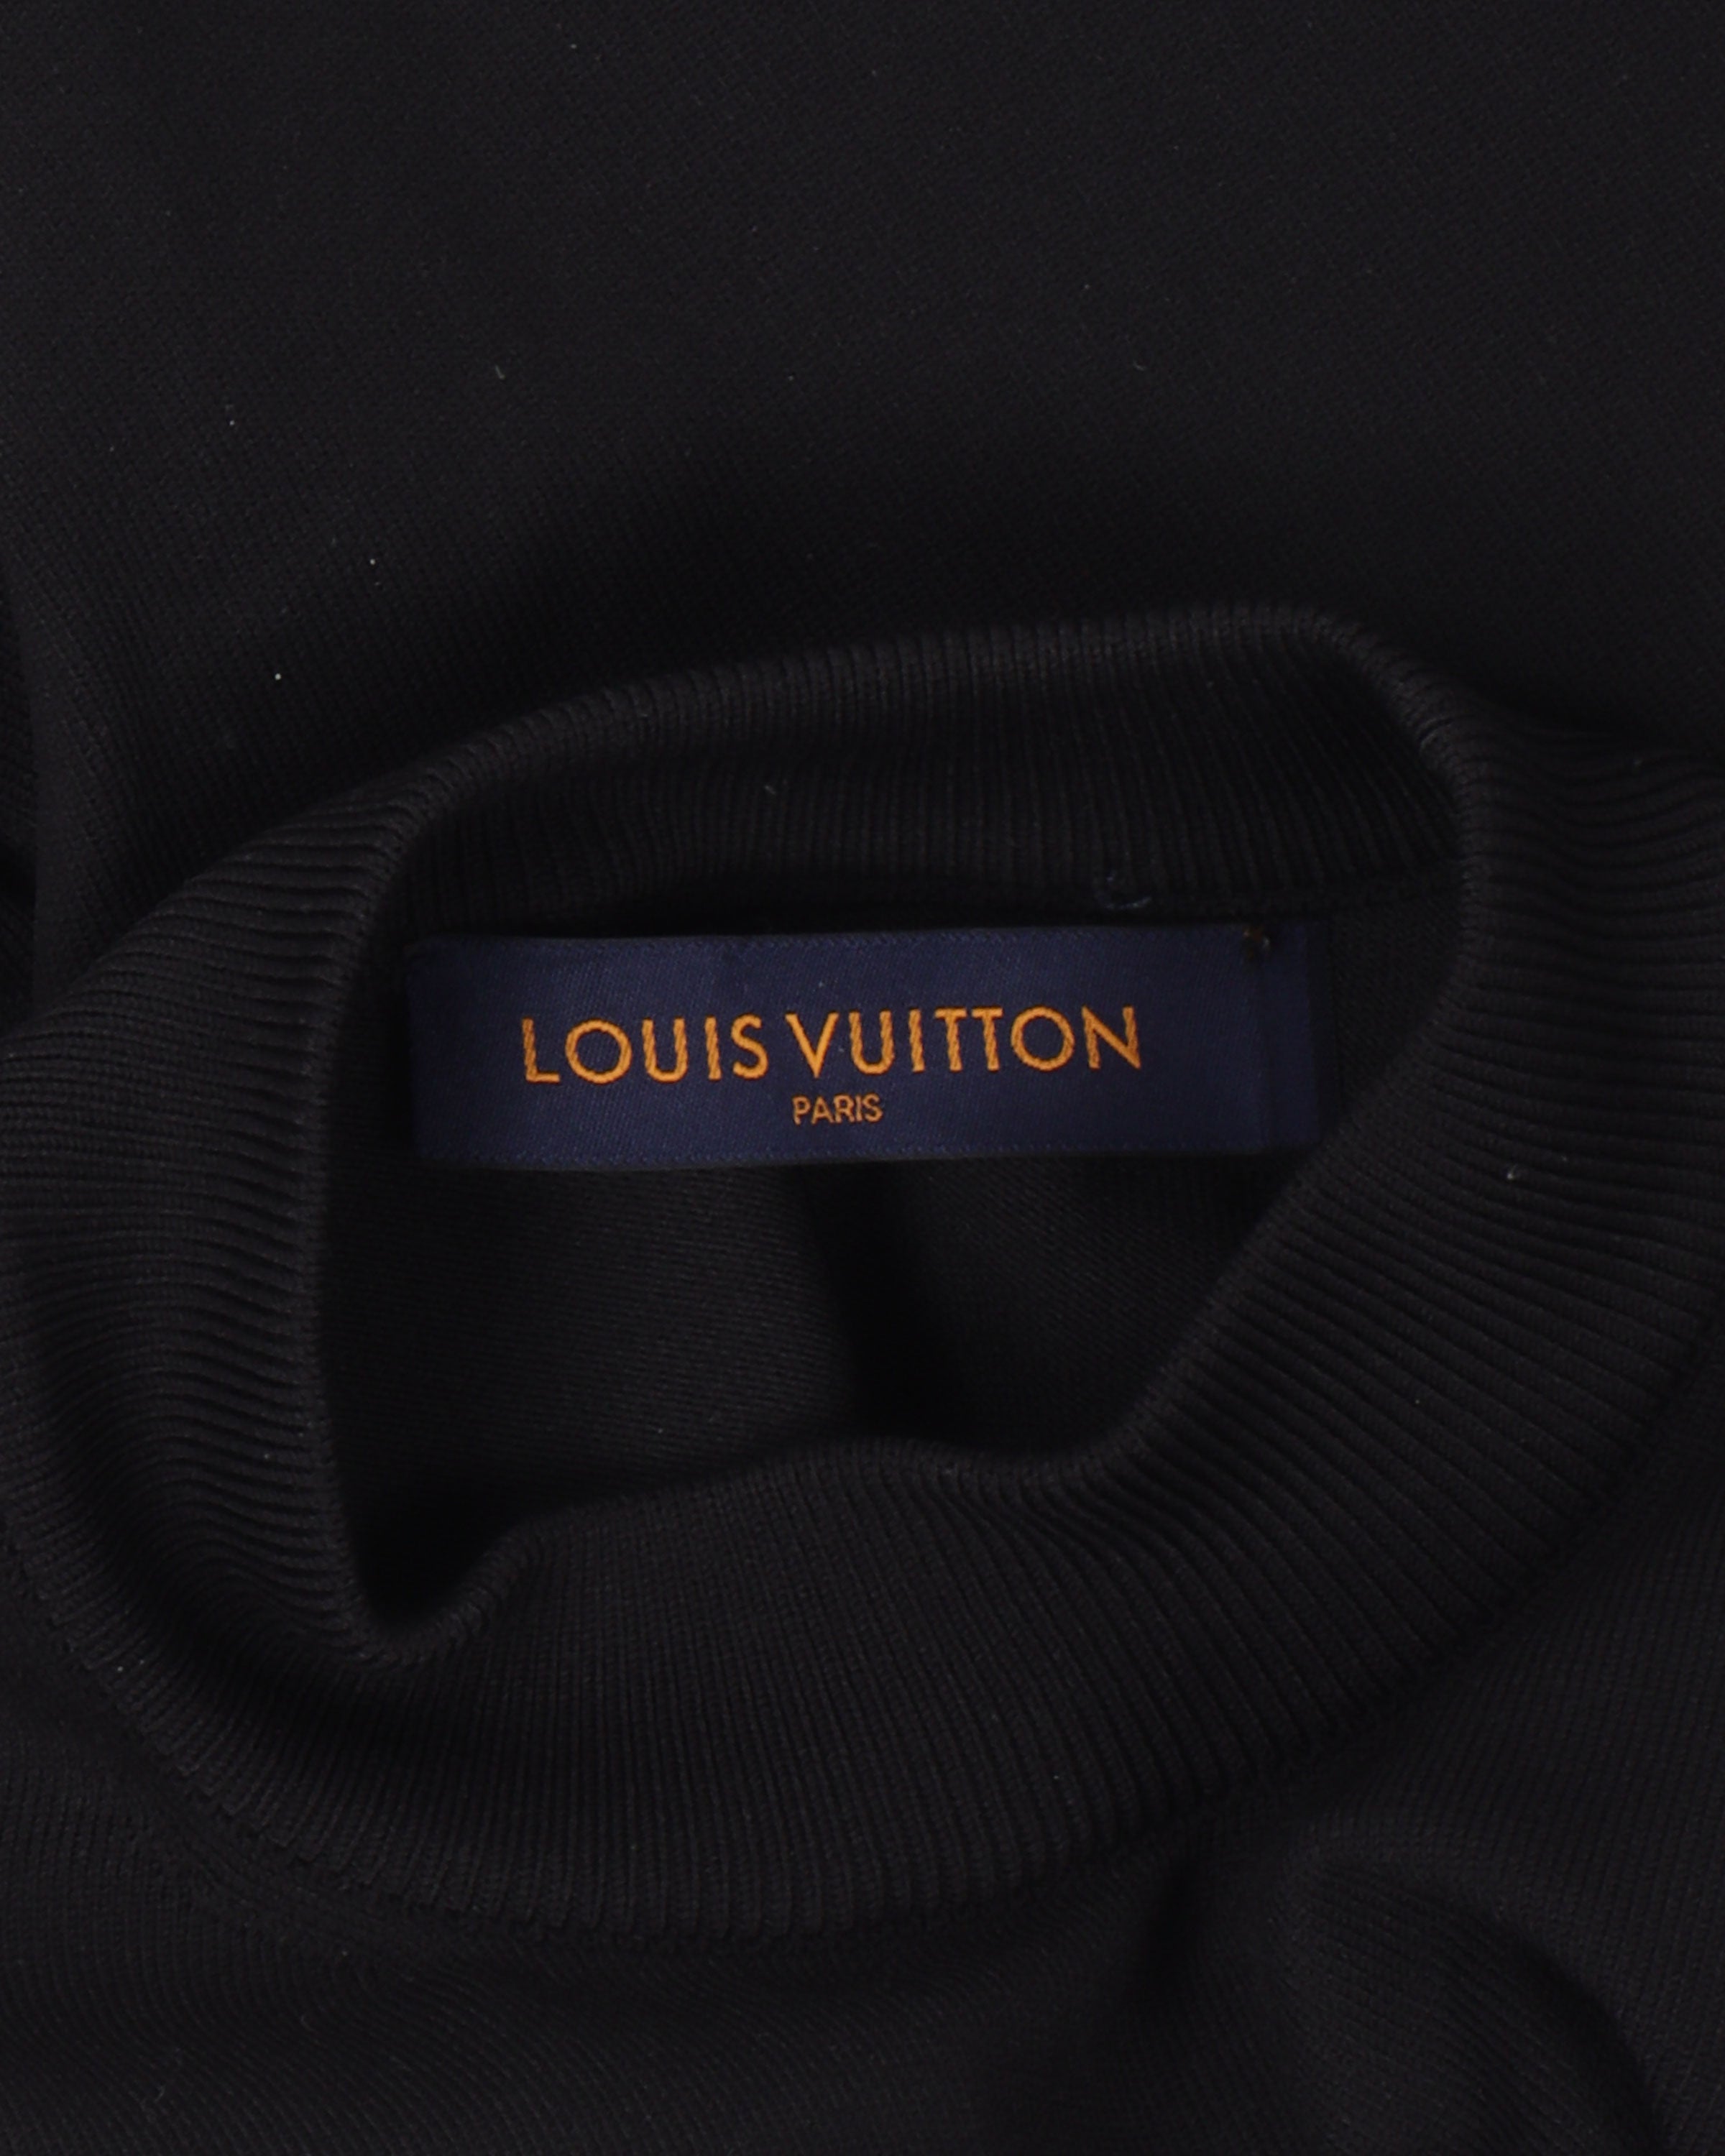 Louis Vuitton Gold And Black Sweater - Tagotee